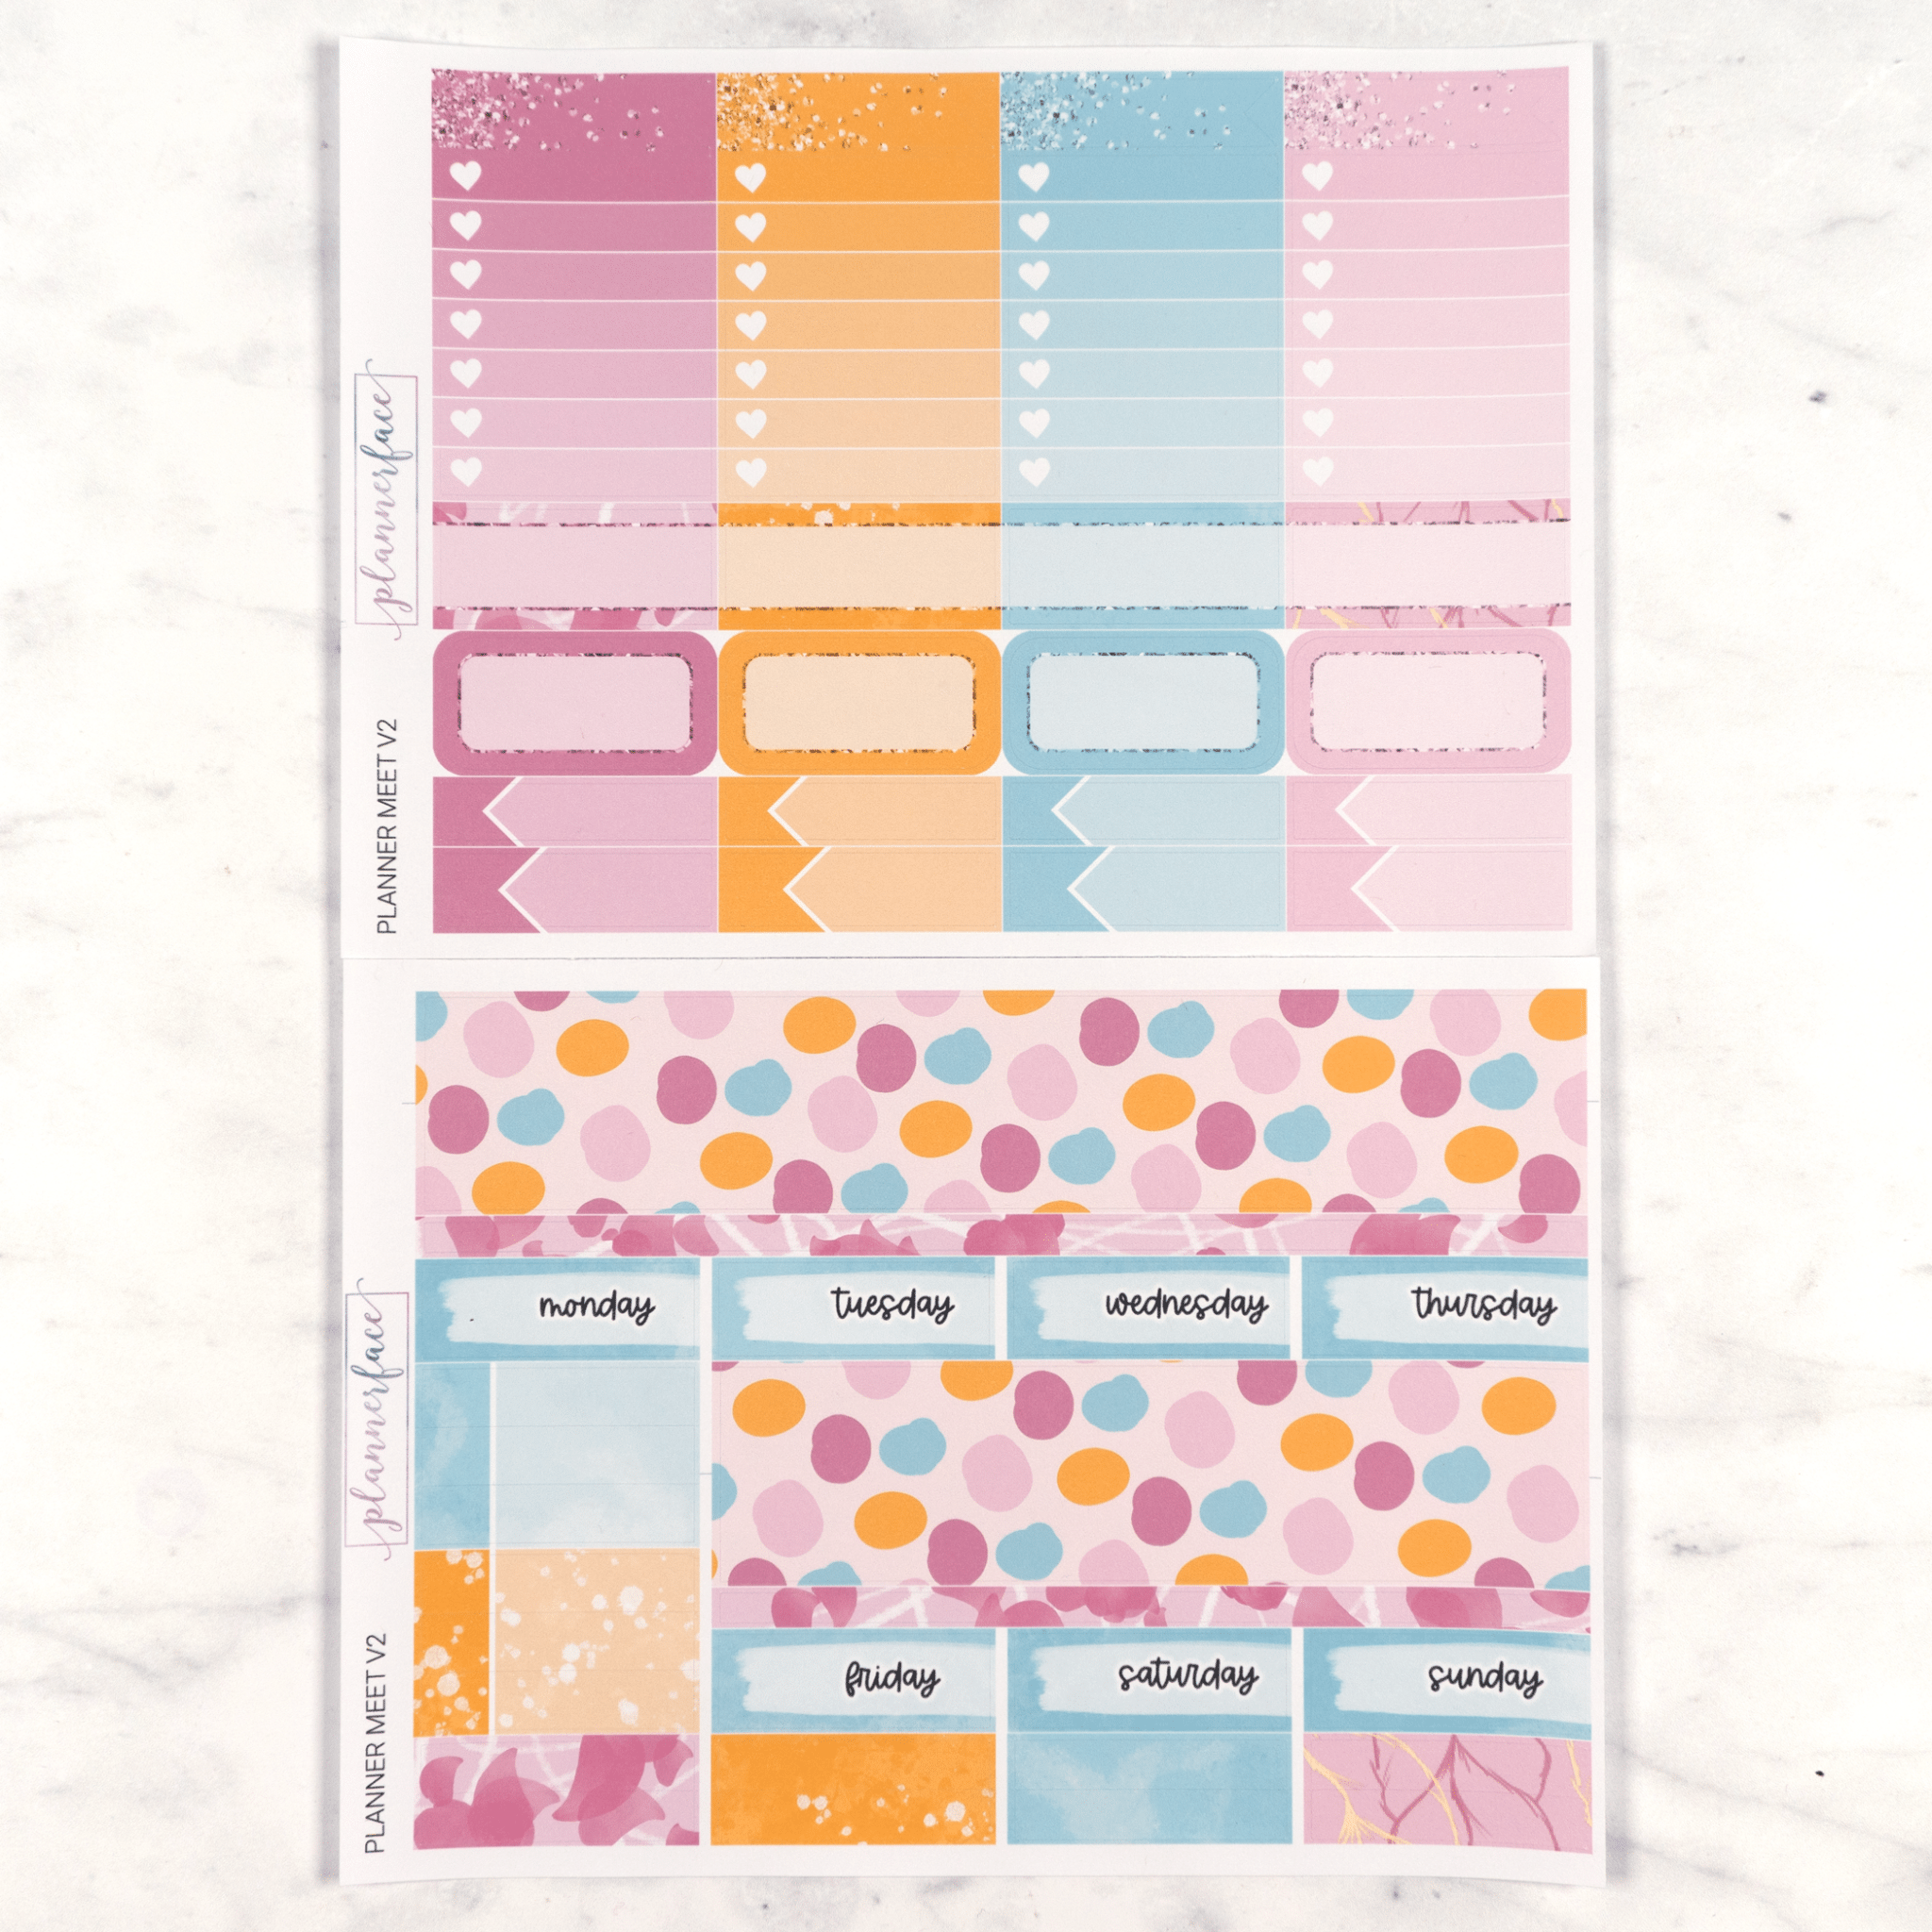 Planner Meet V2 Weekly Kit by Plannerface